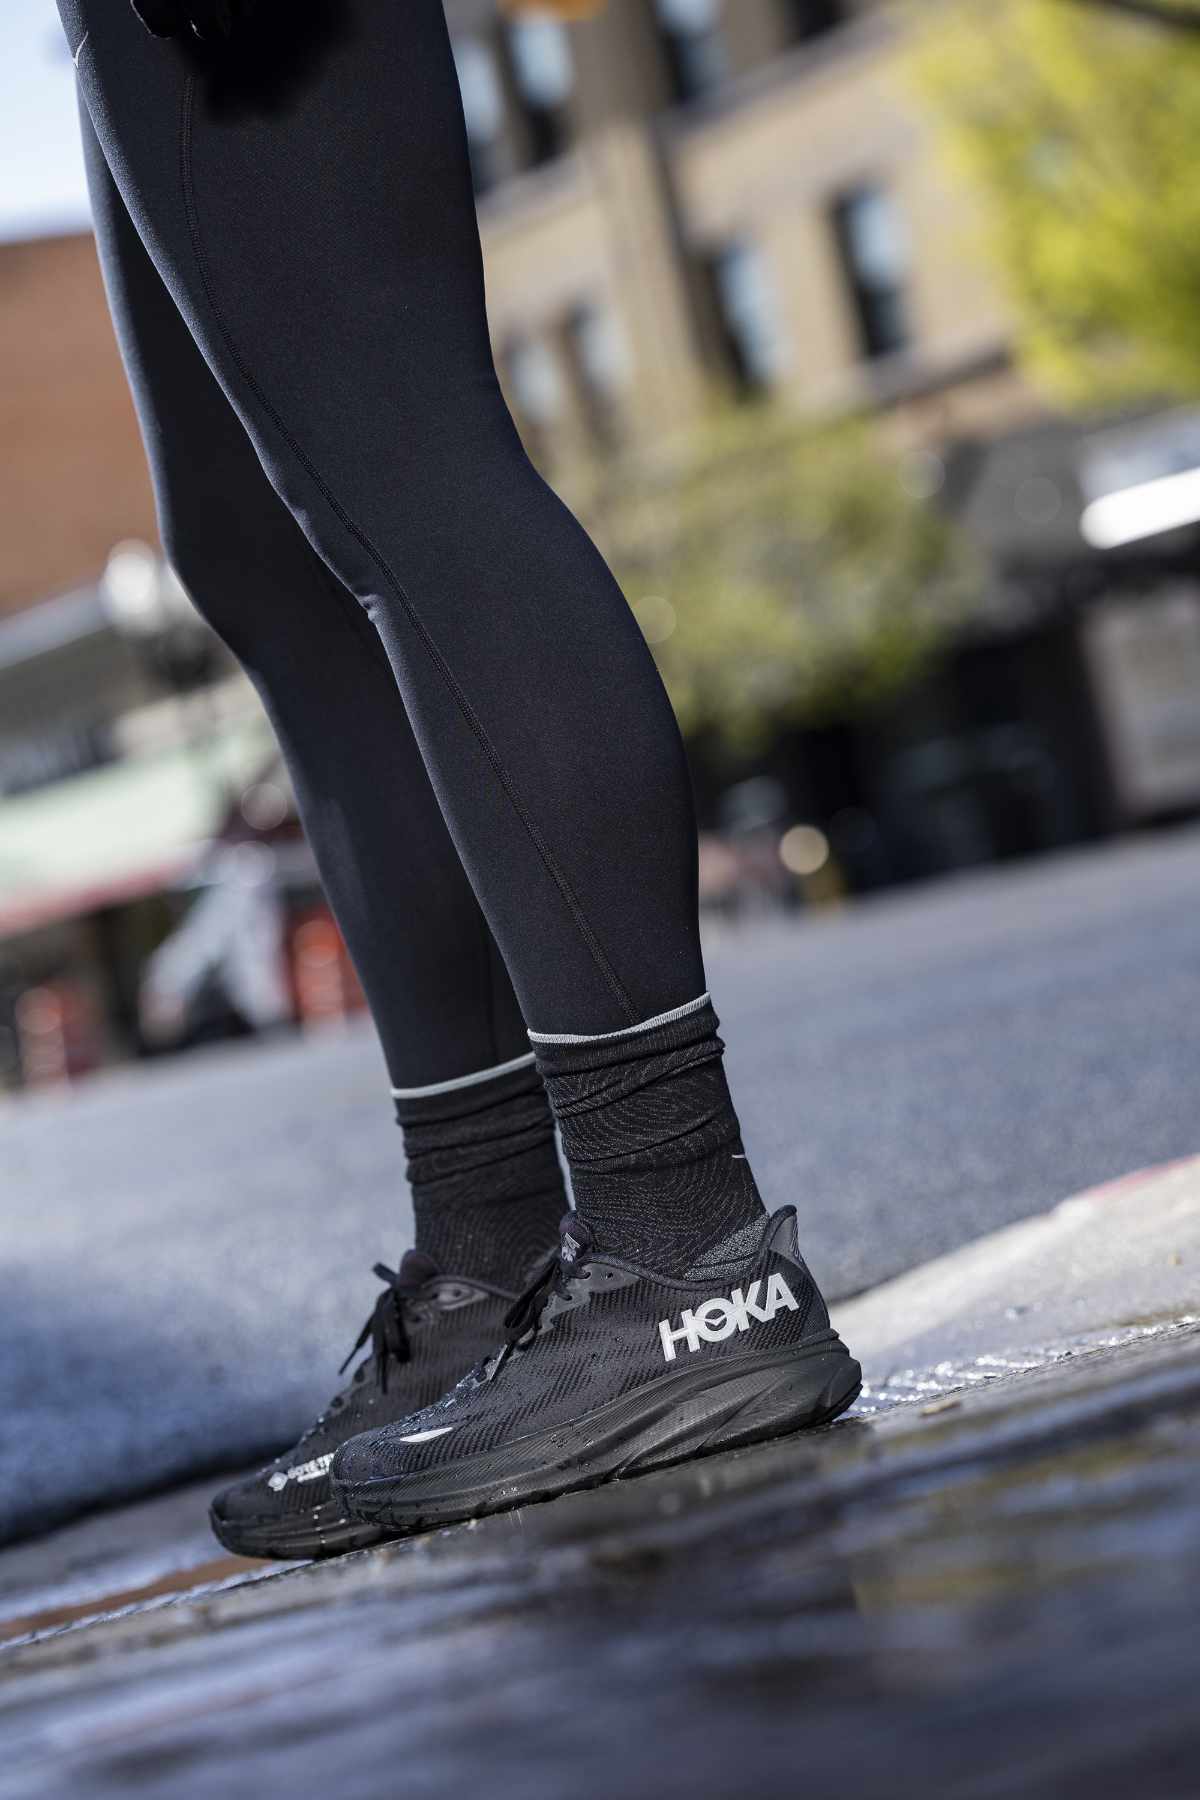 The legs of a runner wearing HOKA's Clifton 9 sneaker in a black GORE-TEX-lined colorway